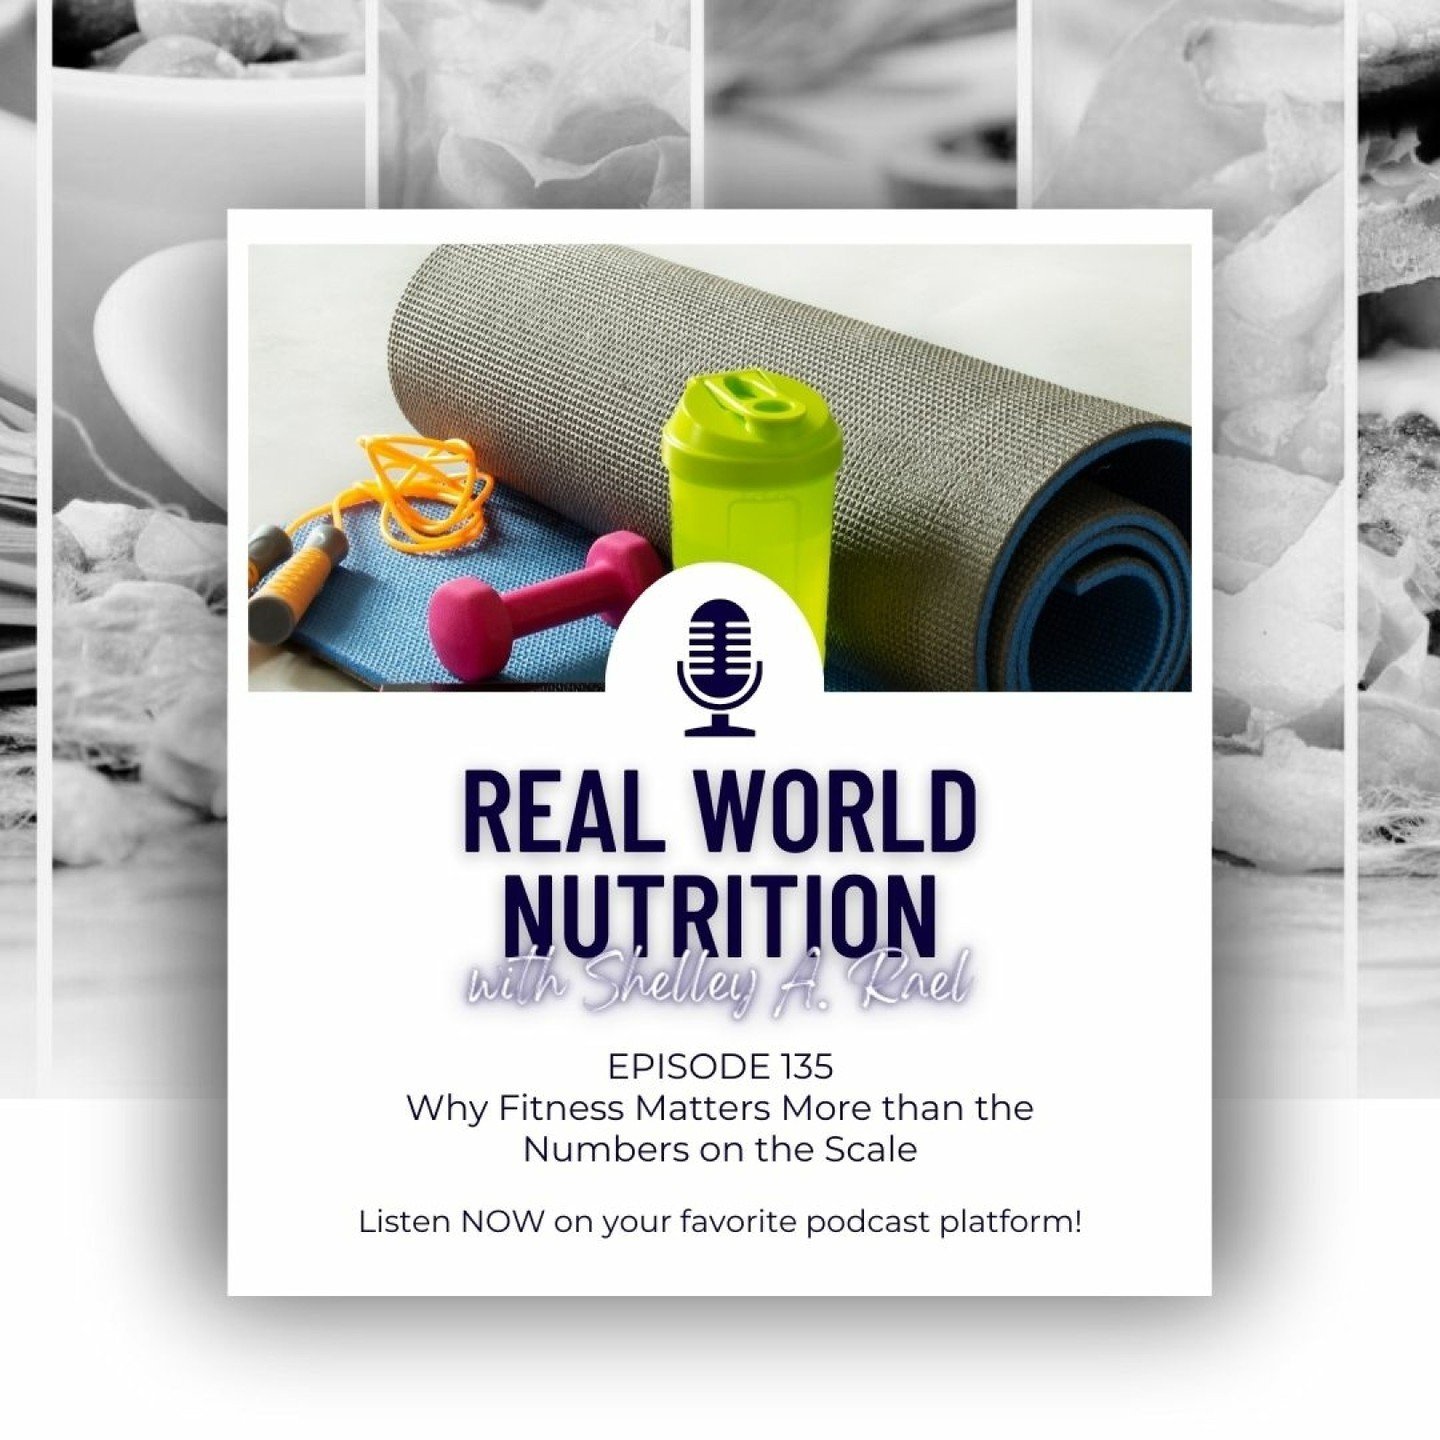 🎙️ Episode 135 of Real World Nutrition is out now! 

🎧 Tune in to a discussion on why fitness is more important than the scale numbers. 

🎙️ Say goodbye to outdated measures like BMI and learn alternative metrics that reflect your progress and cel